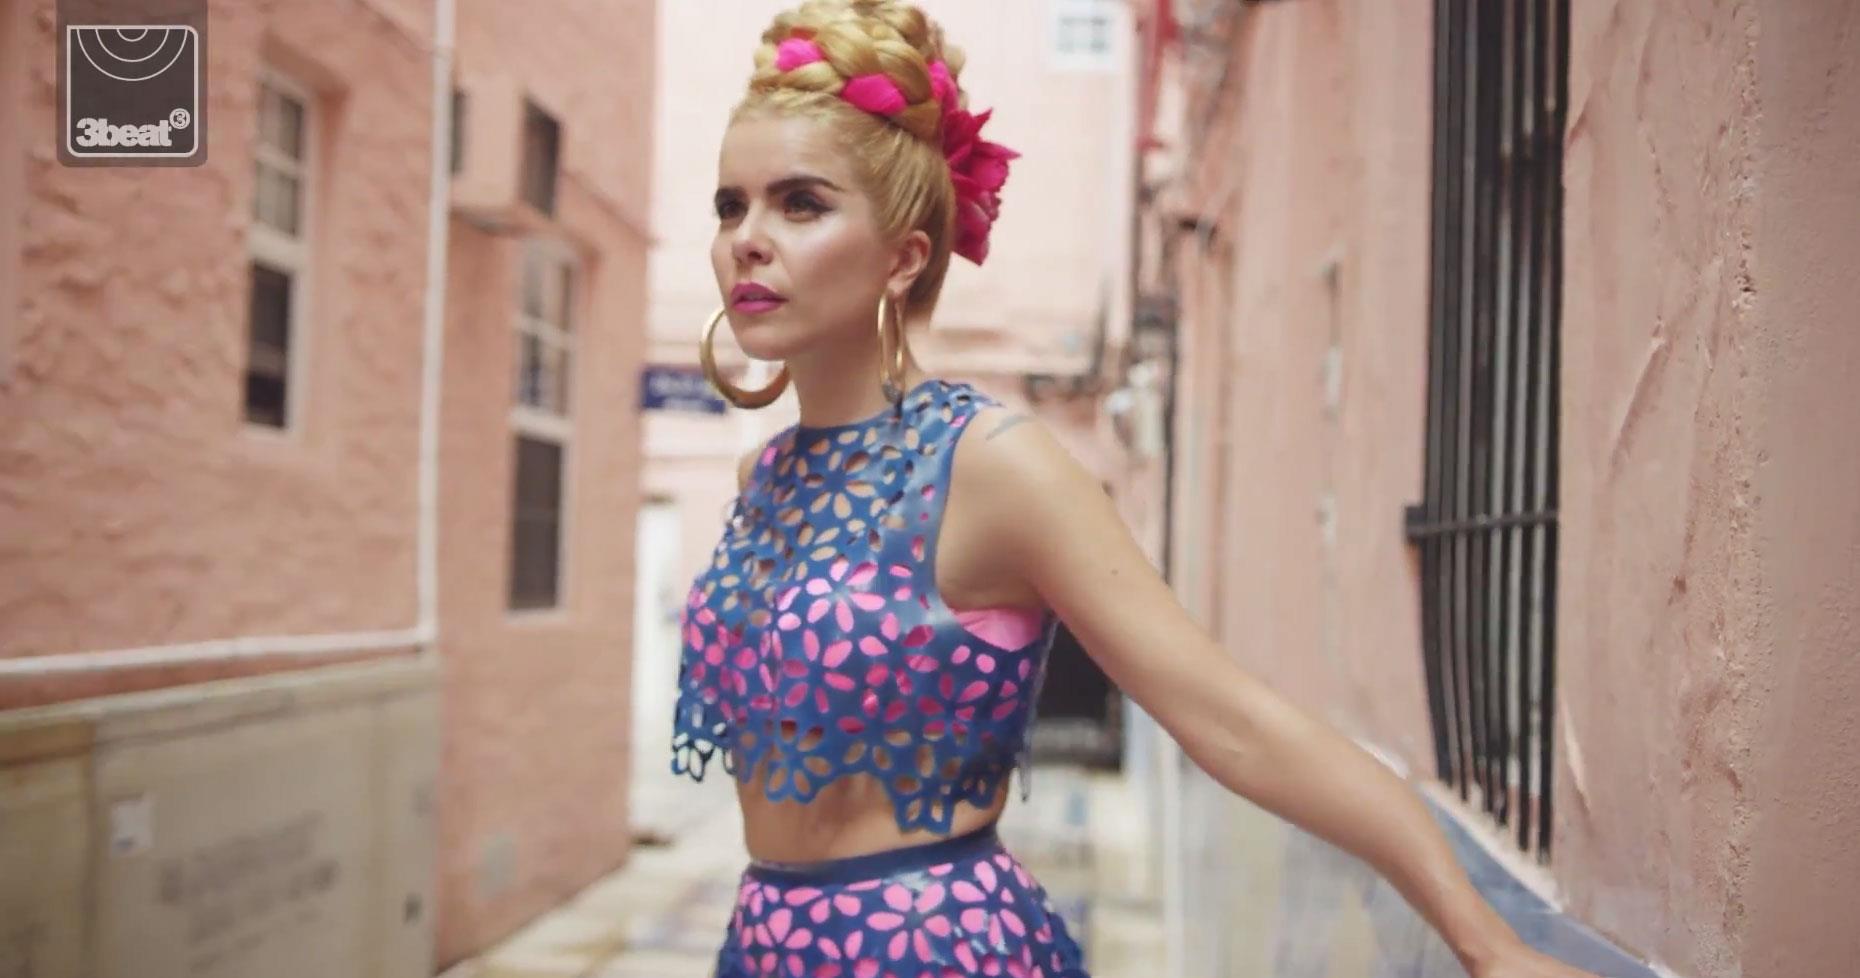 Sigma ft Paloma Faith - Changing Official Video - YouTube